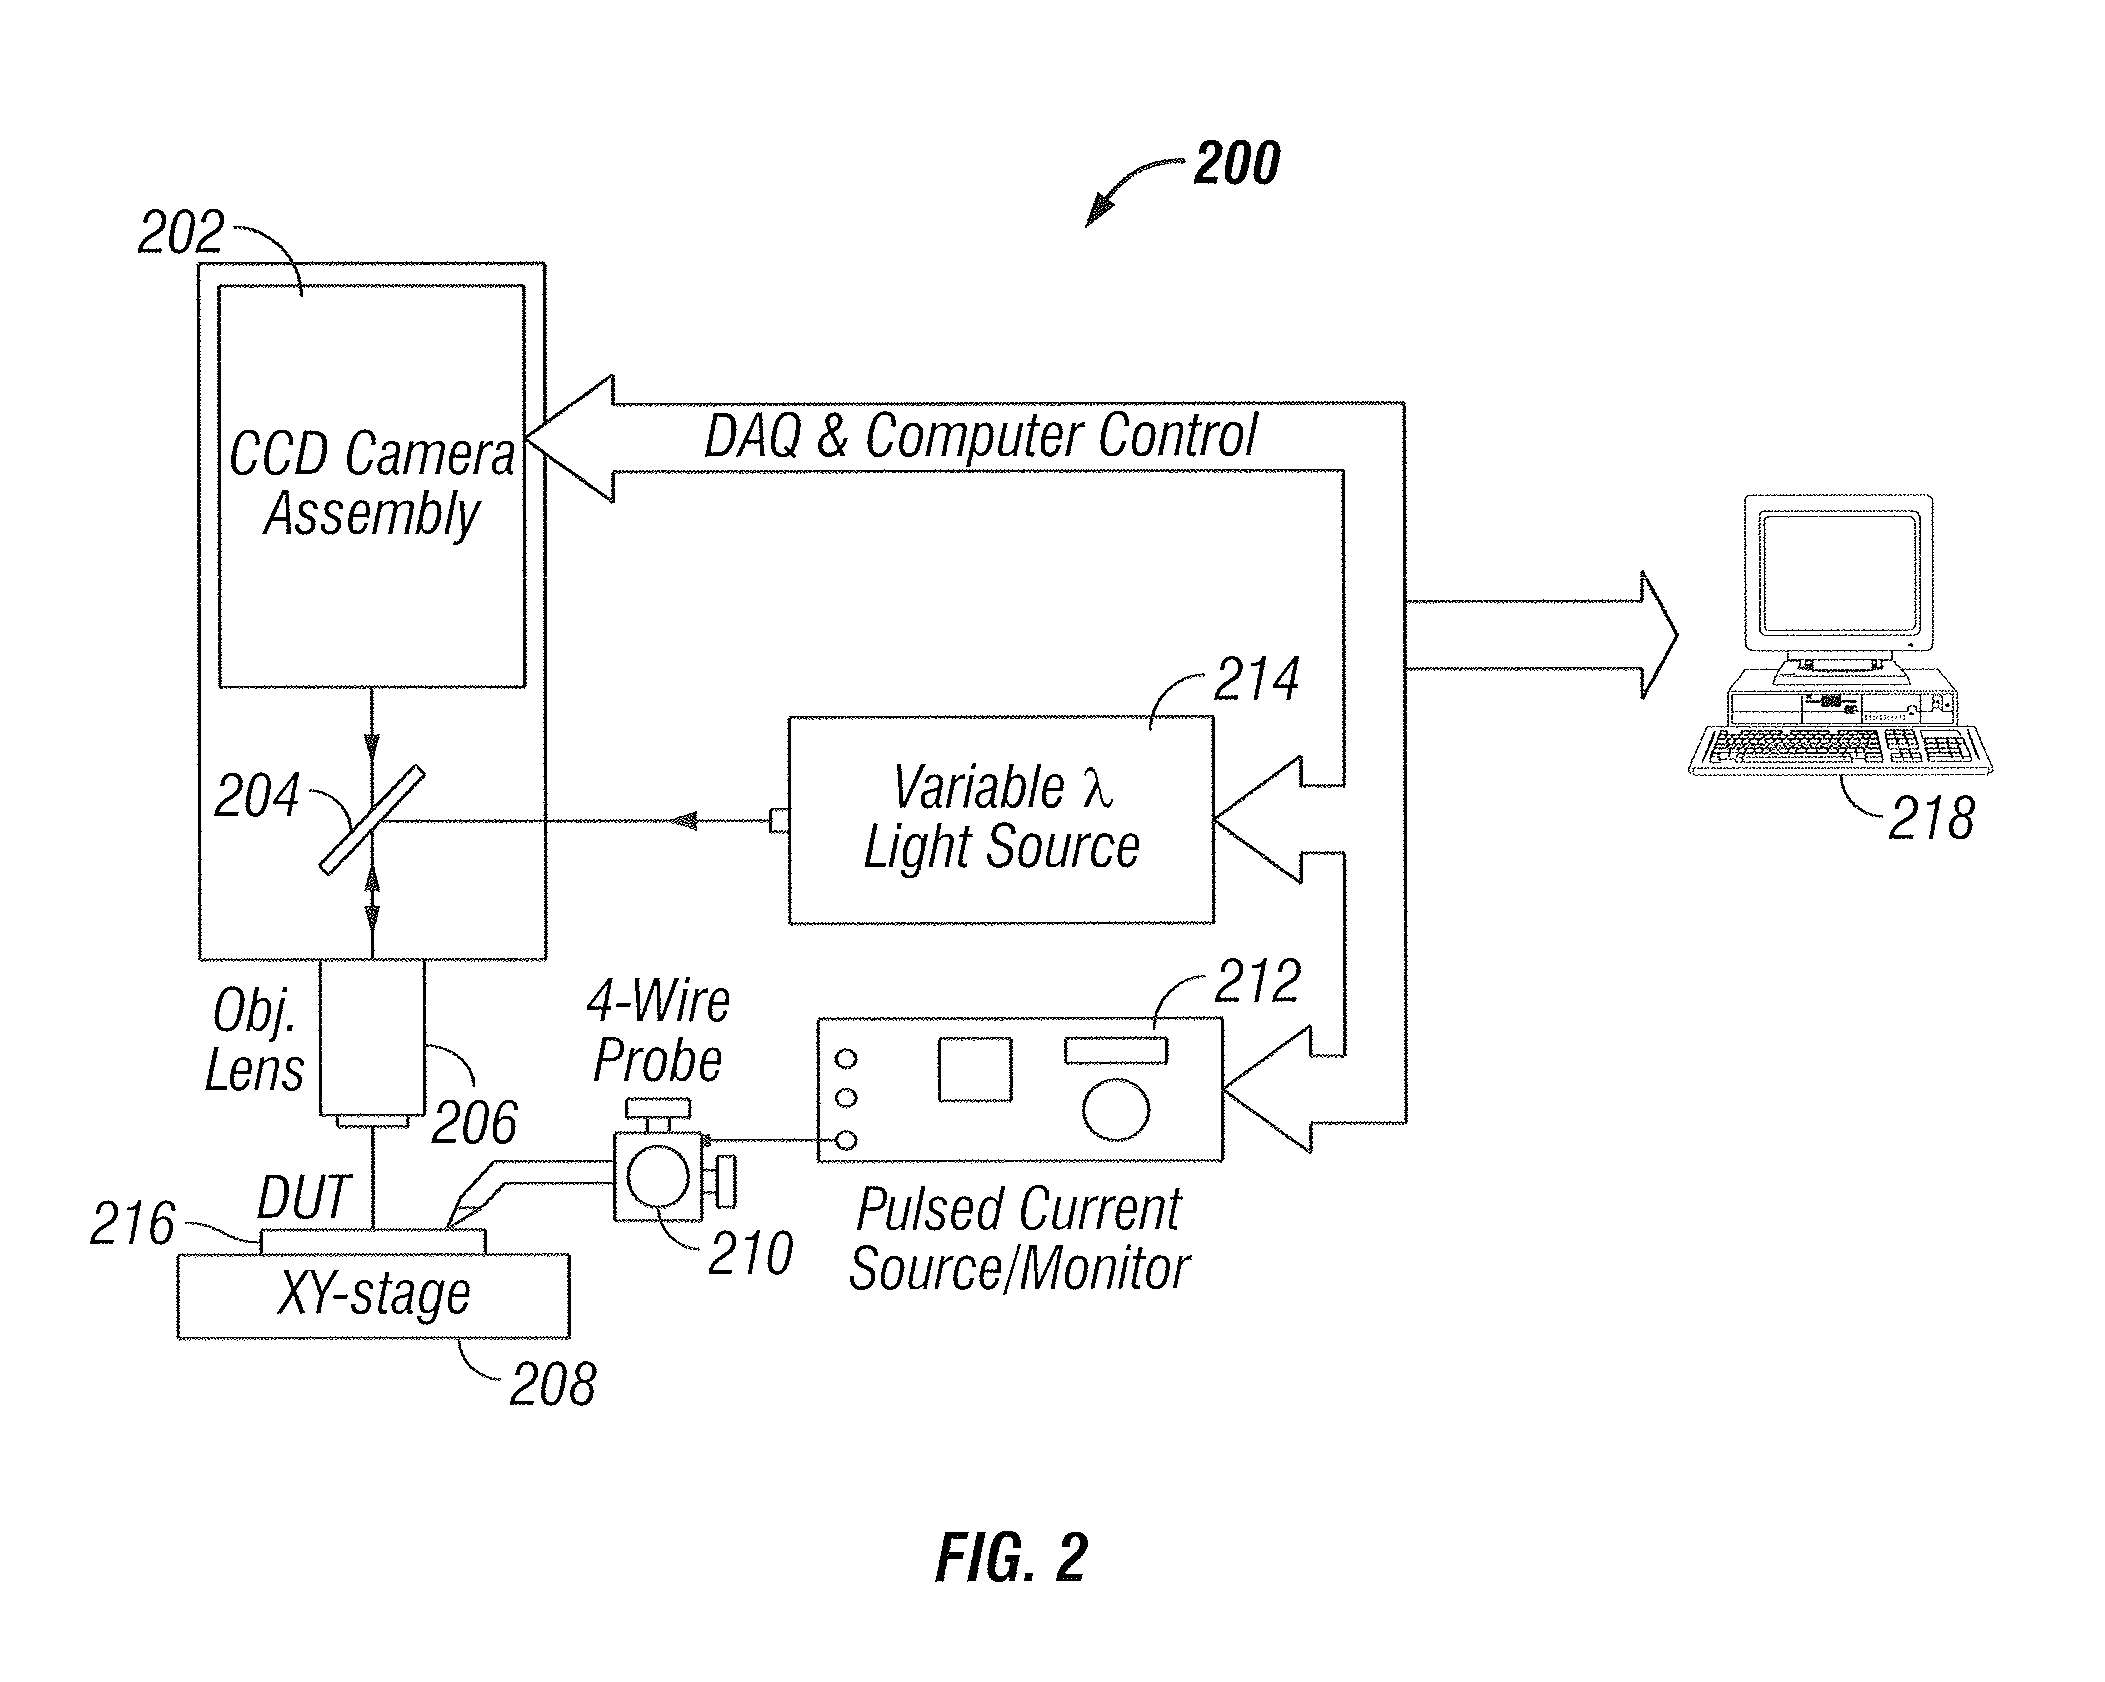 Thermography measurement system for conducting thermal characterization of integrated circuits